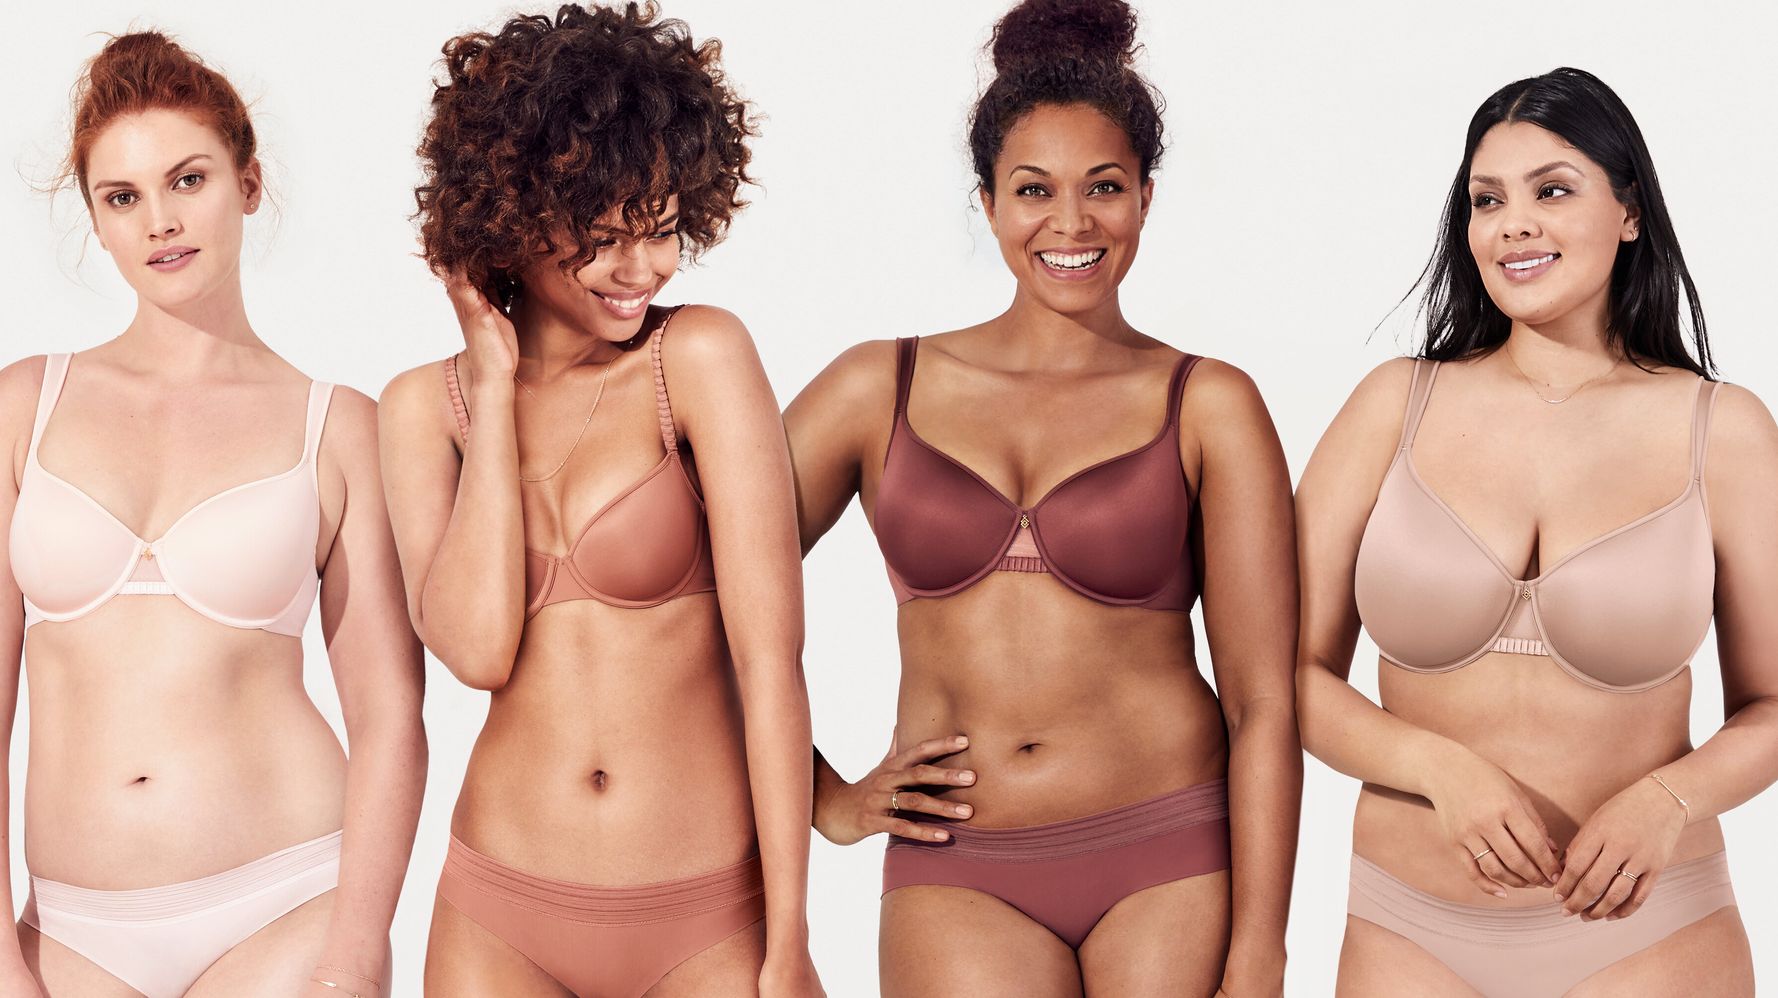 What most people don't know about bra sizes…